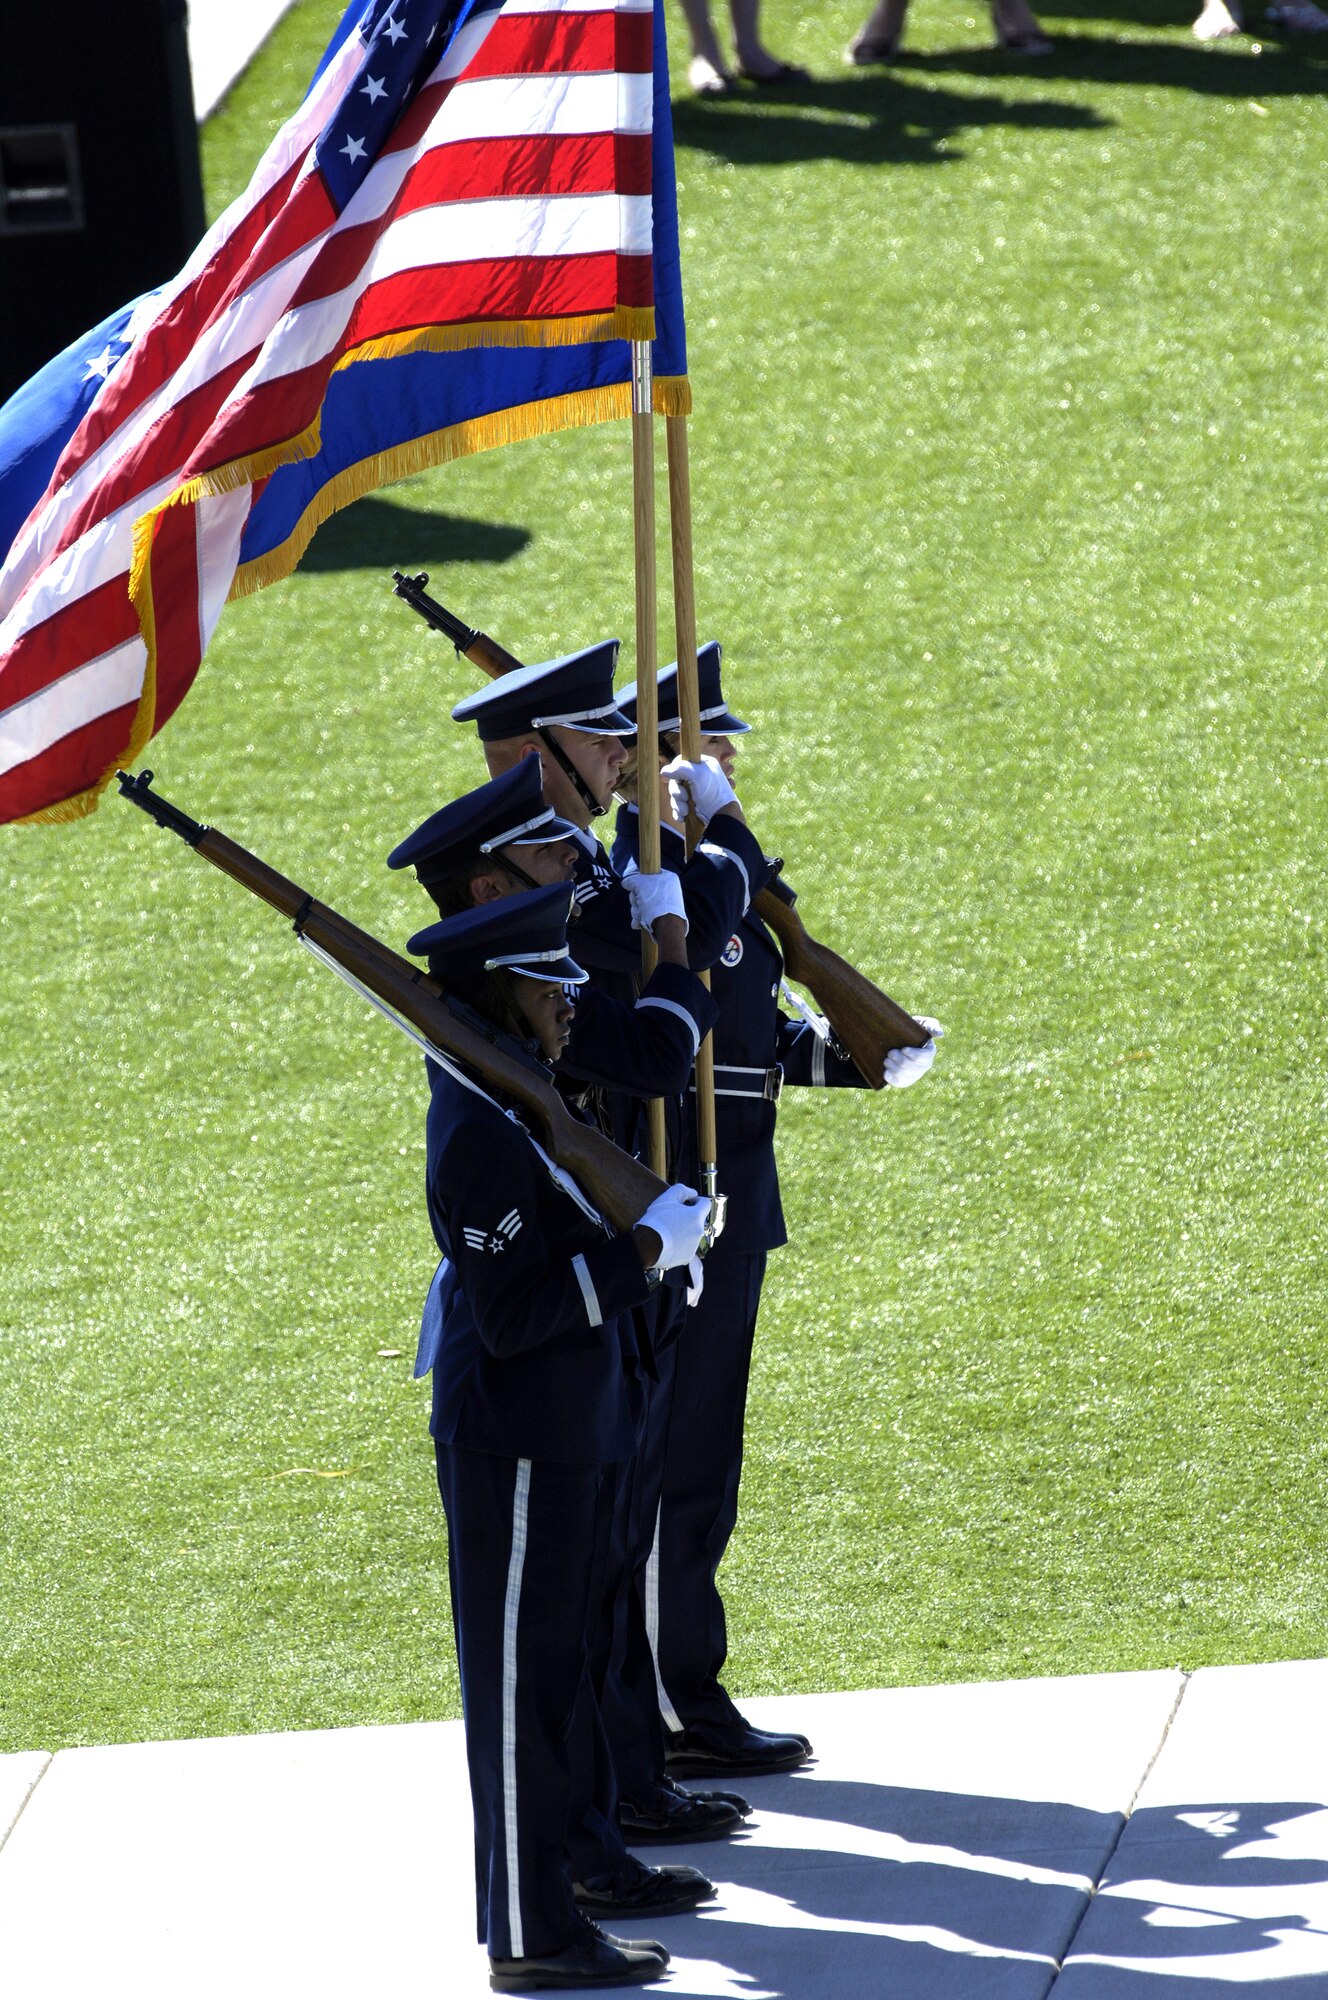 Members of the Holloman present the colors at the Sunset Stealth retirement ceremony at Holloman AFB, N.M., 21 April 2008.The F-117A flew under the flag of the 49th Fighter Wing at Holloman Air Force Base, New Mexico from 1992 to its retirement in 2008. (U.S. Air Force Photo by SSgt Jason Colbert)